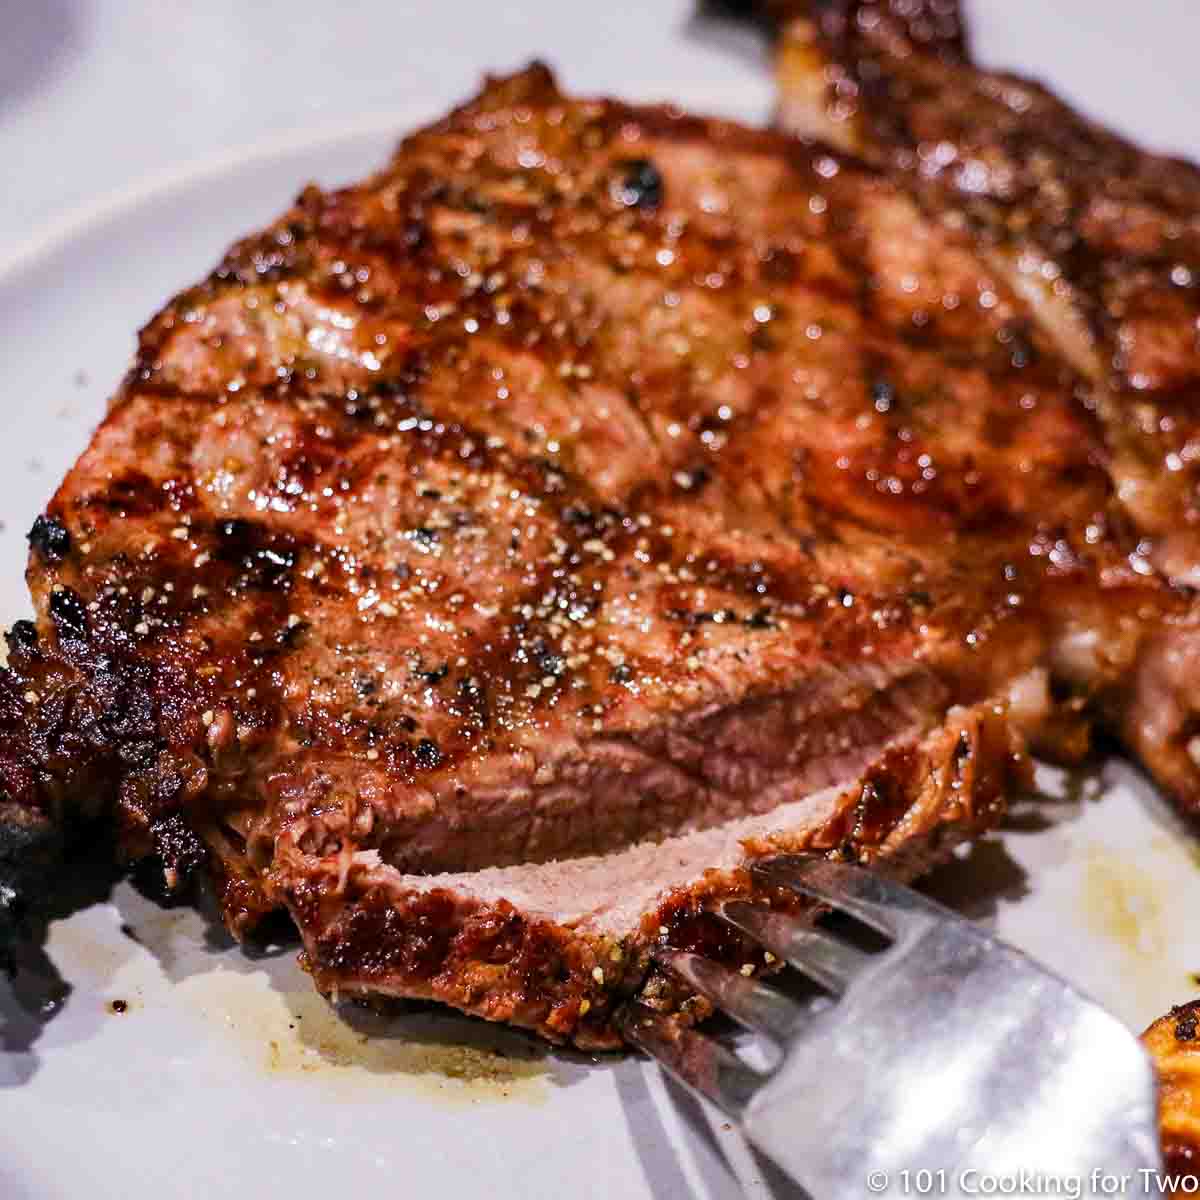 How to Grill a Ribeye Steak on a Gas Grill